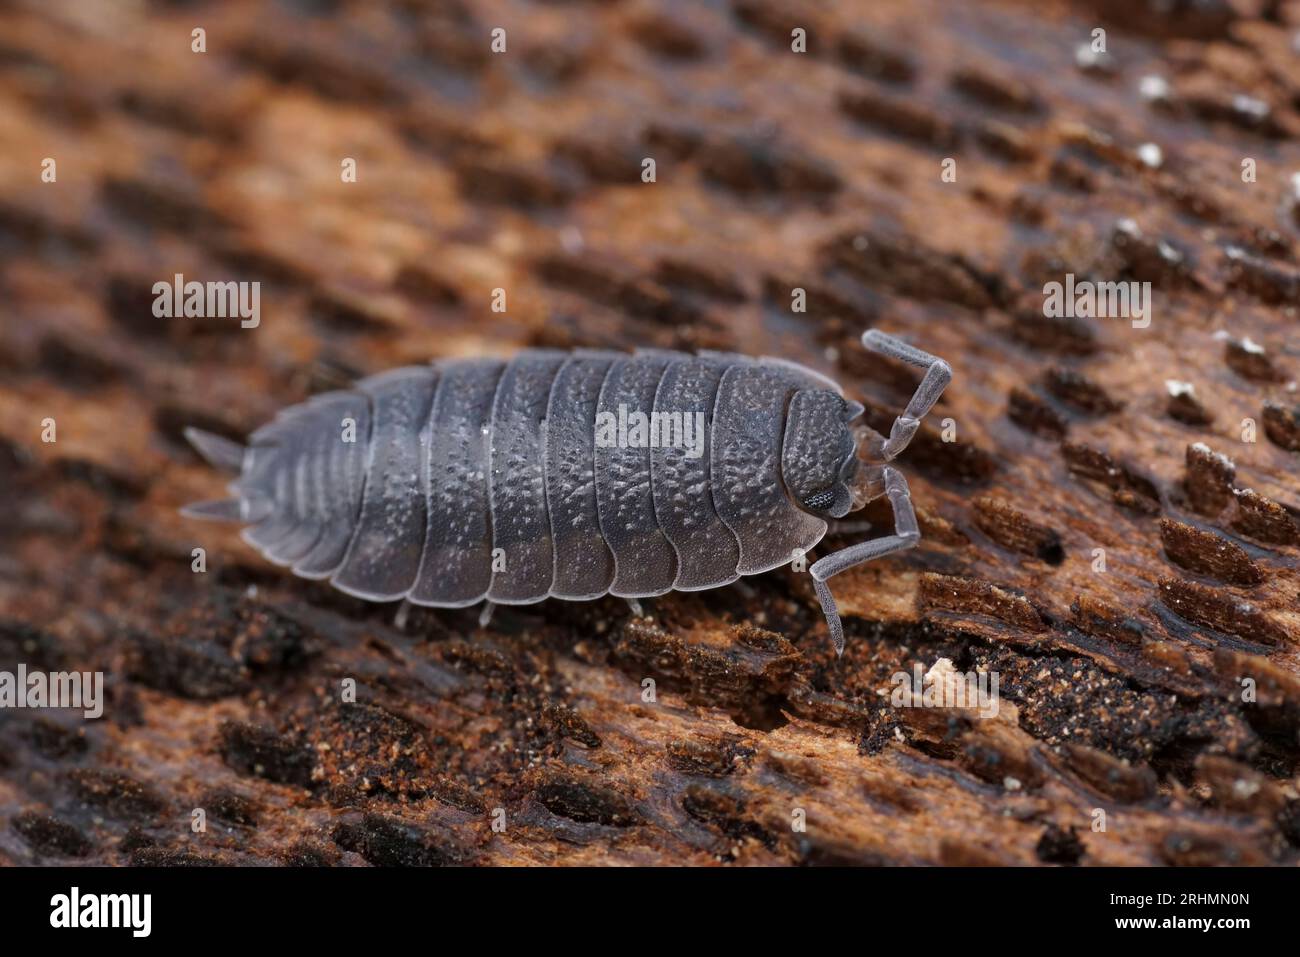 Natural closeup on a grey rough woodlouse, Porcellio scaber sitting on a piece of wood Stock Photo